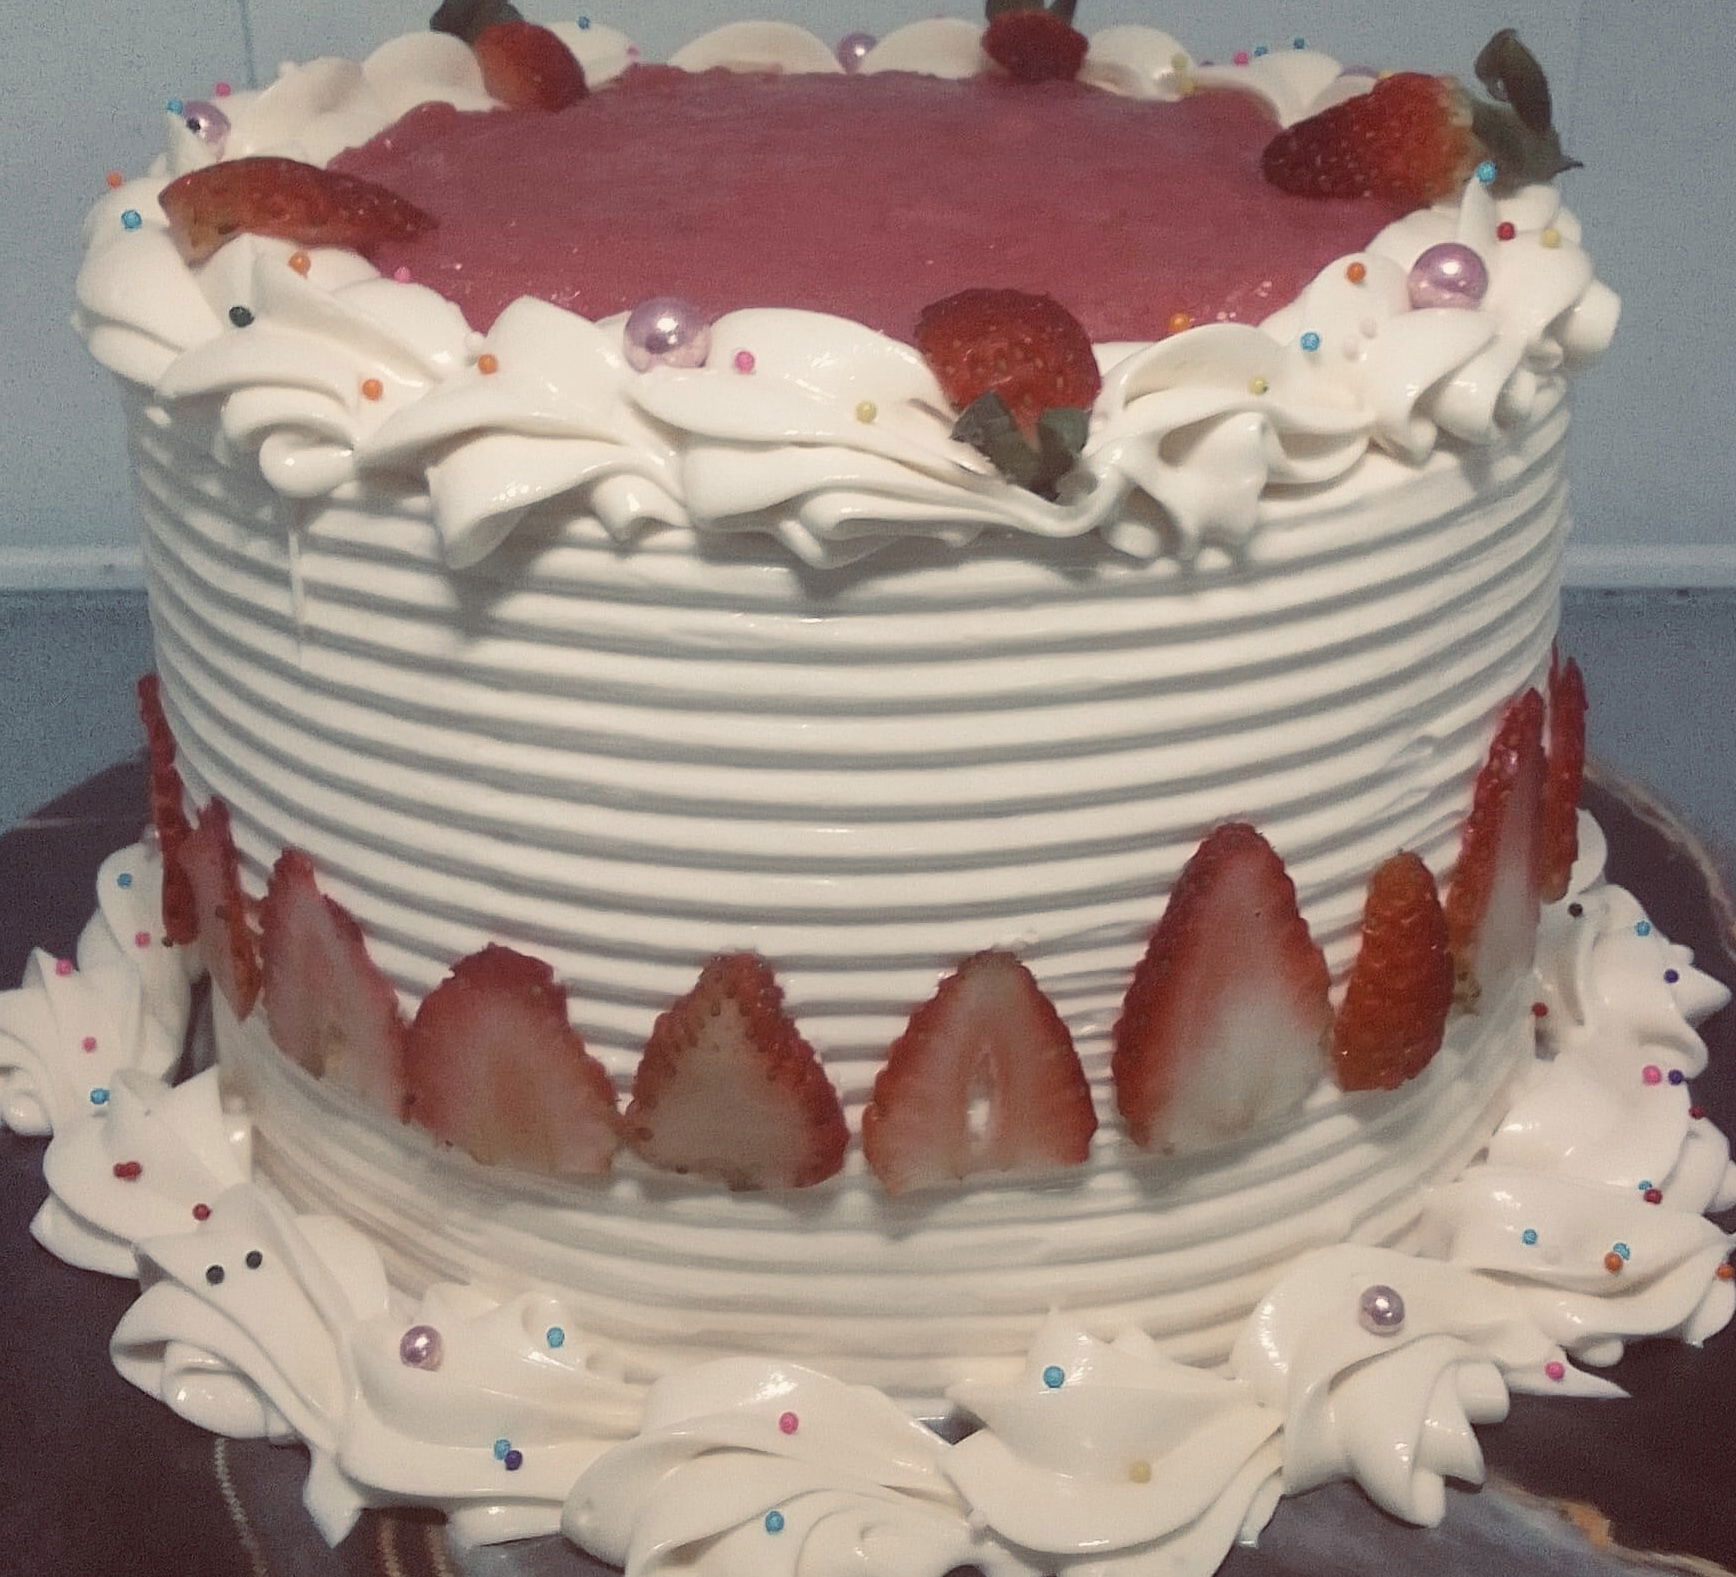 2 Layer Strawberry Shortcake with Buttercream Frosting and Fresh Strawberries